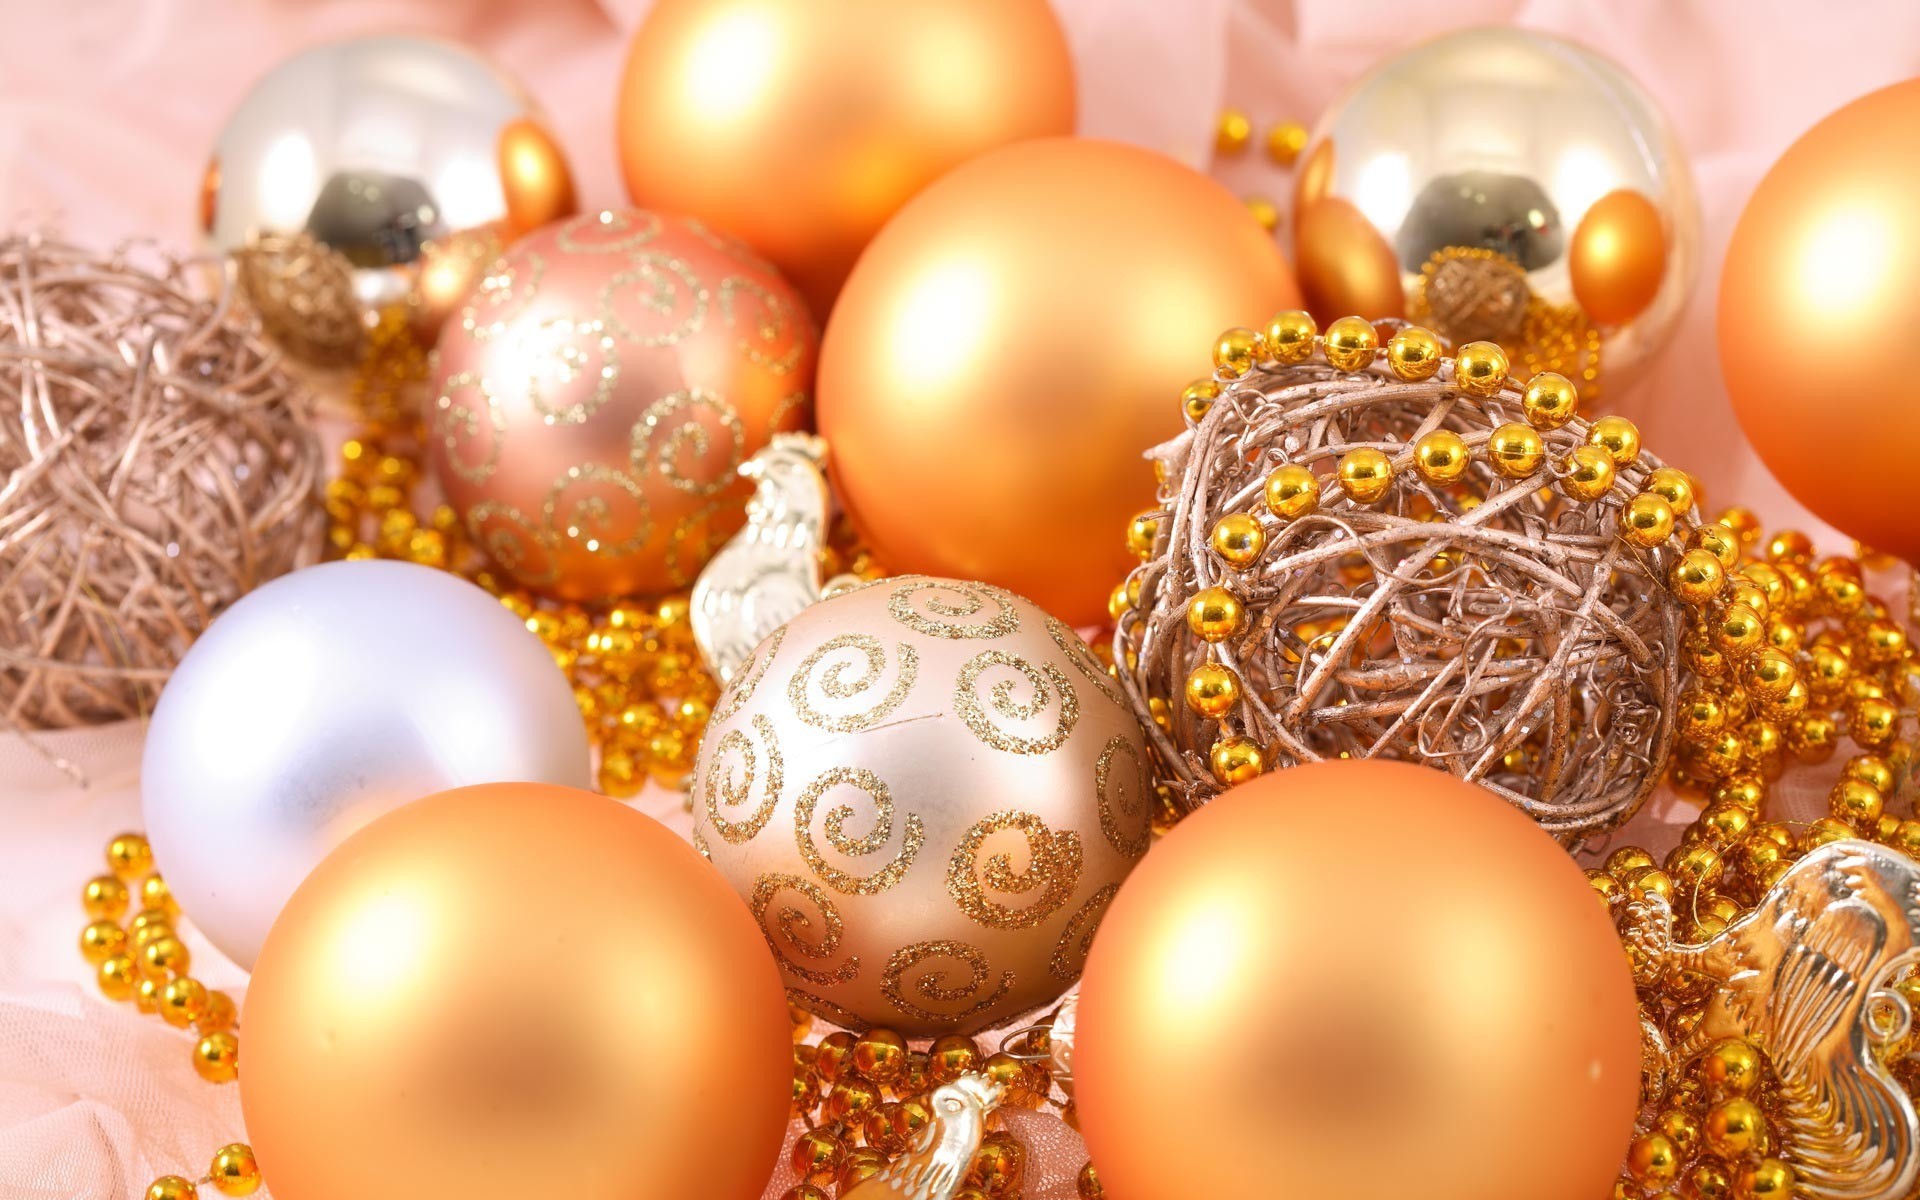 Christmas Ornament Photos Download The BEST Free Christmas Ornament Stock  Photos  HD Images